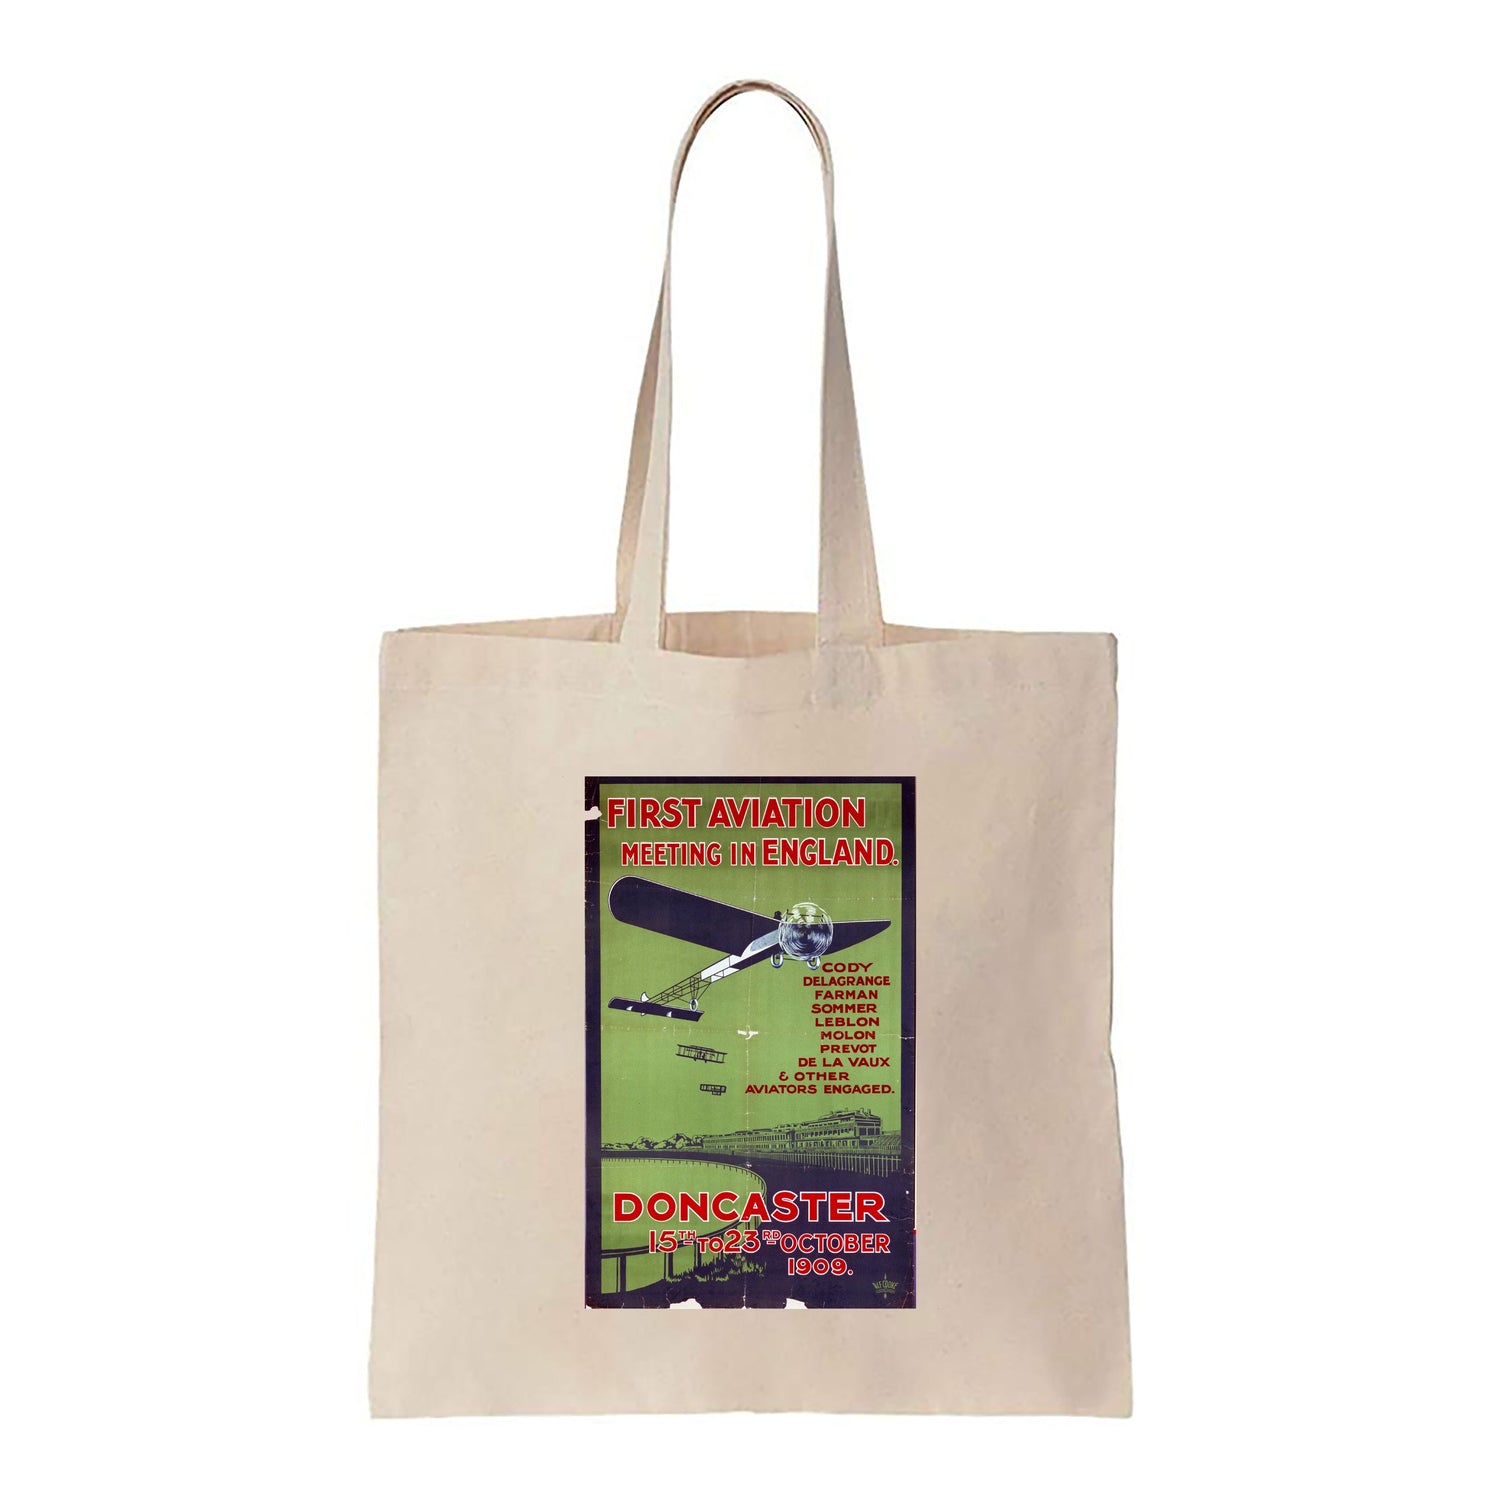 First Aviation meeting in England - Doncaster - Canvas Tote Bag